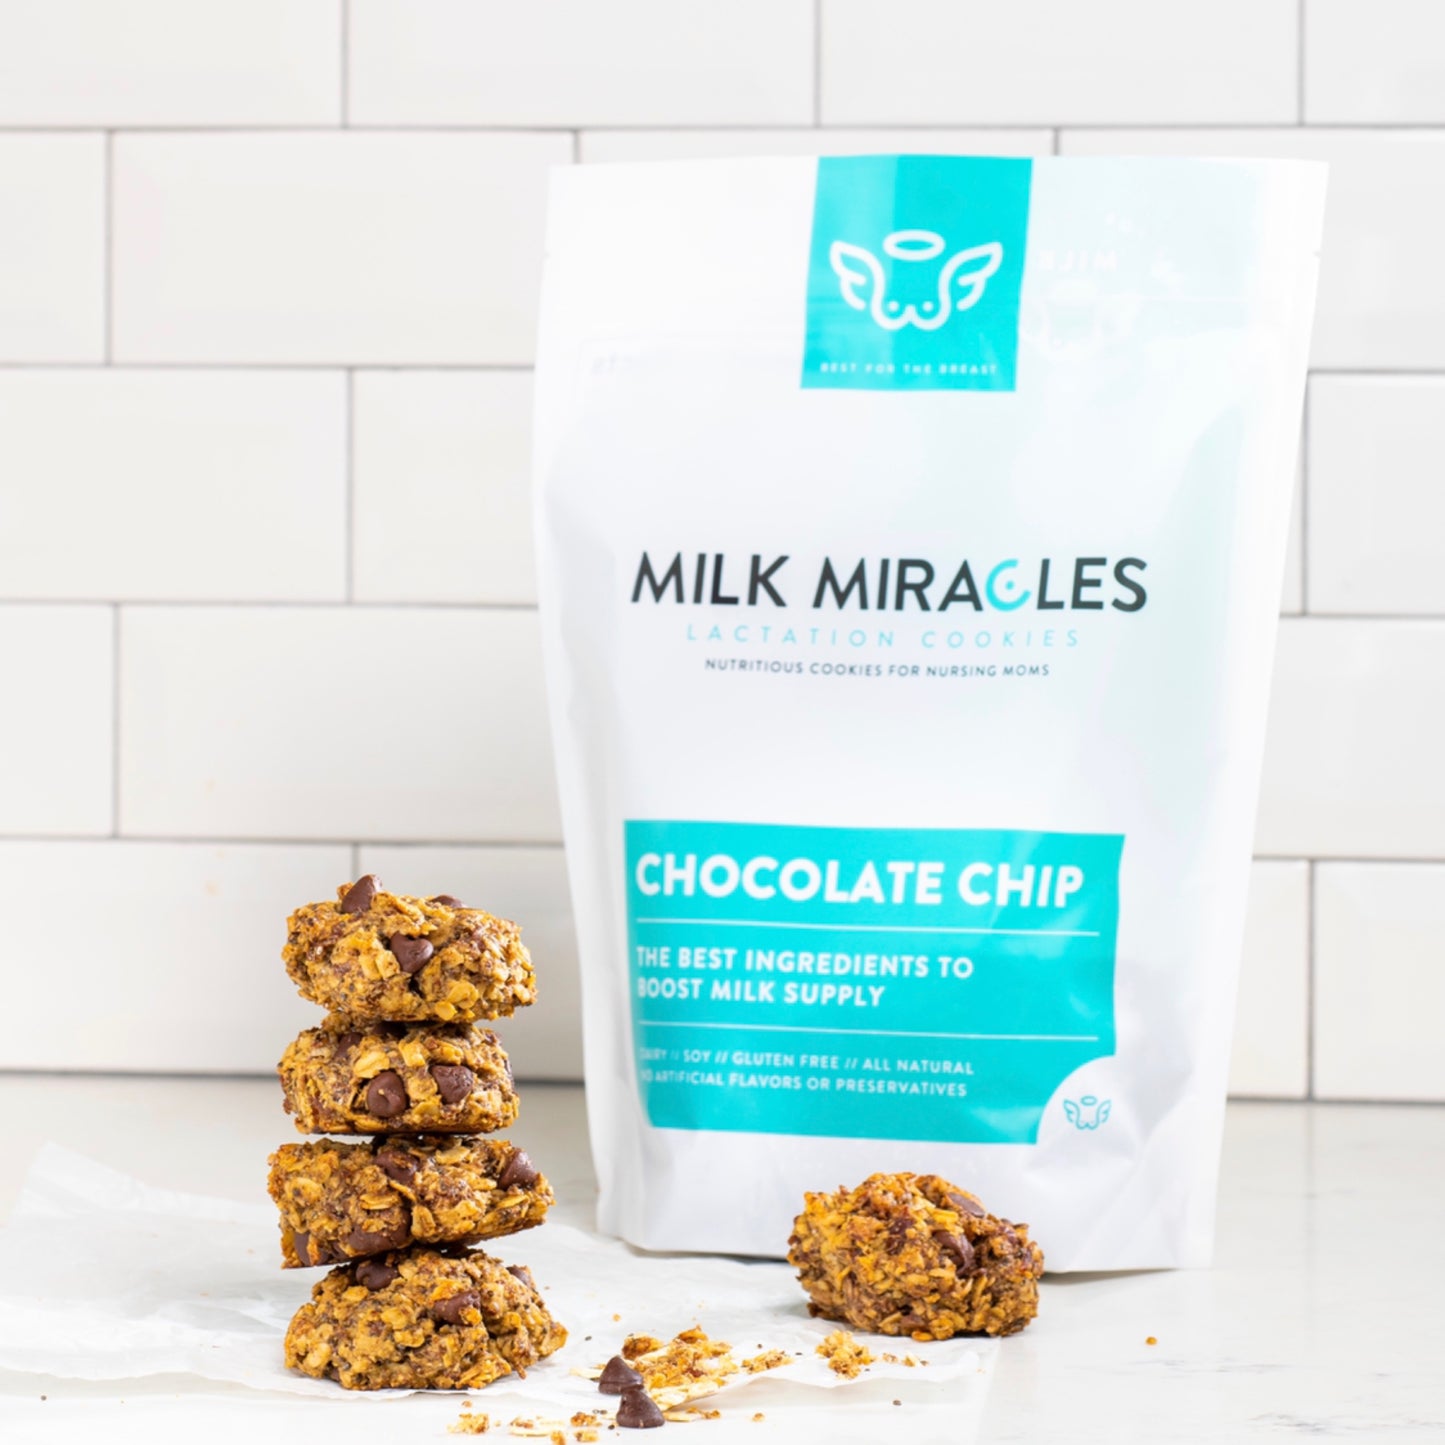 MILK MIRACLES - BEST FOR THE BREAST LACTATION COOKIES